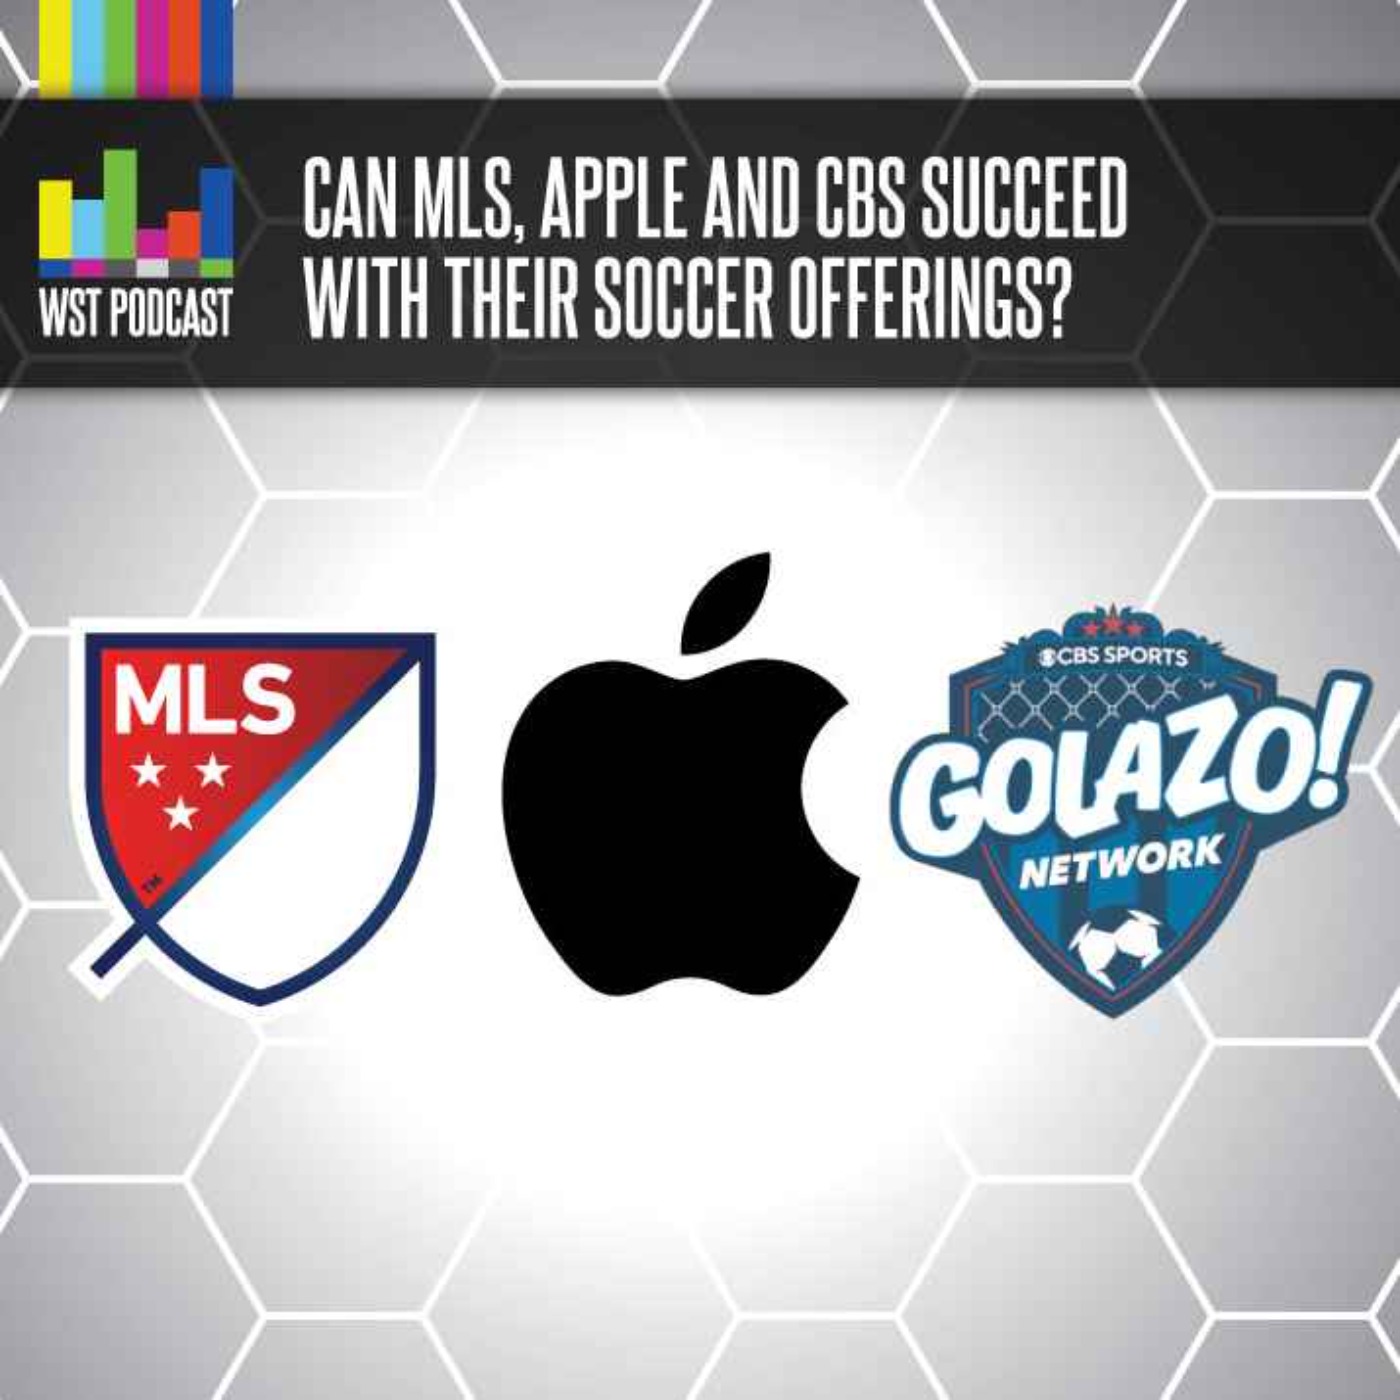 Can MLS, Apple and CBS succeed with their soccer offerings?